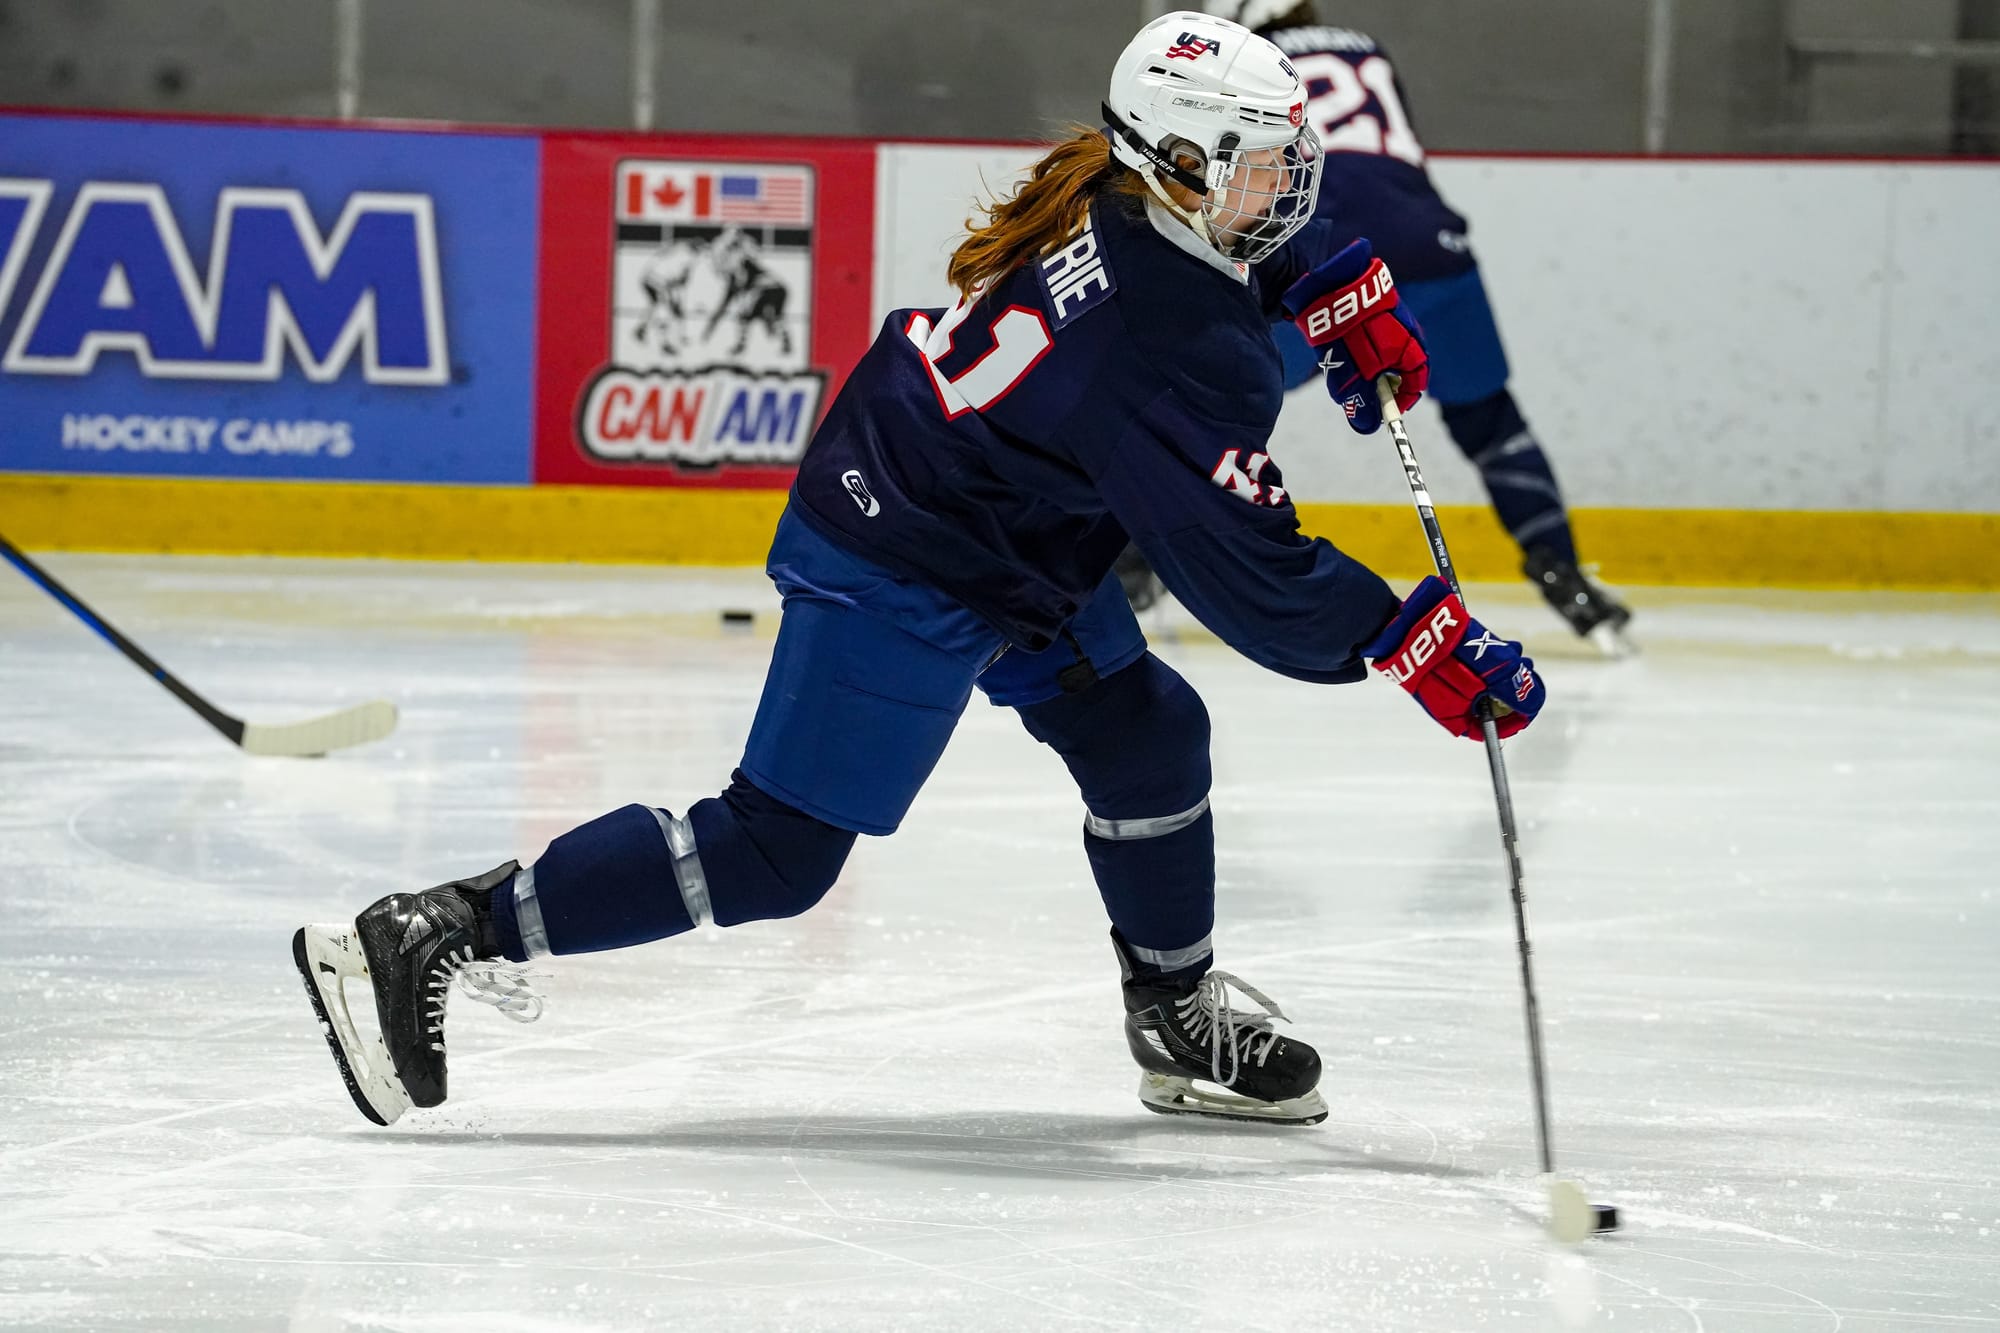 Dominque Petrie takes a shot during warmups before a scrimmage. Her weight is all on her left (front) leg and her stick is bent, as she is in the middle of taking a wrist shot. She is wearing a navy blue uniform.